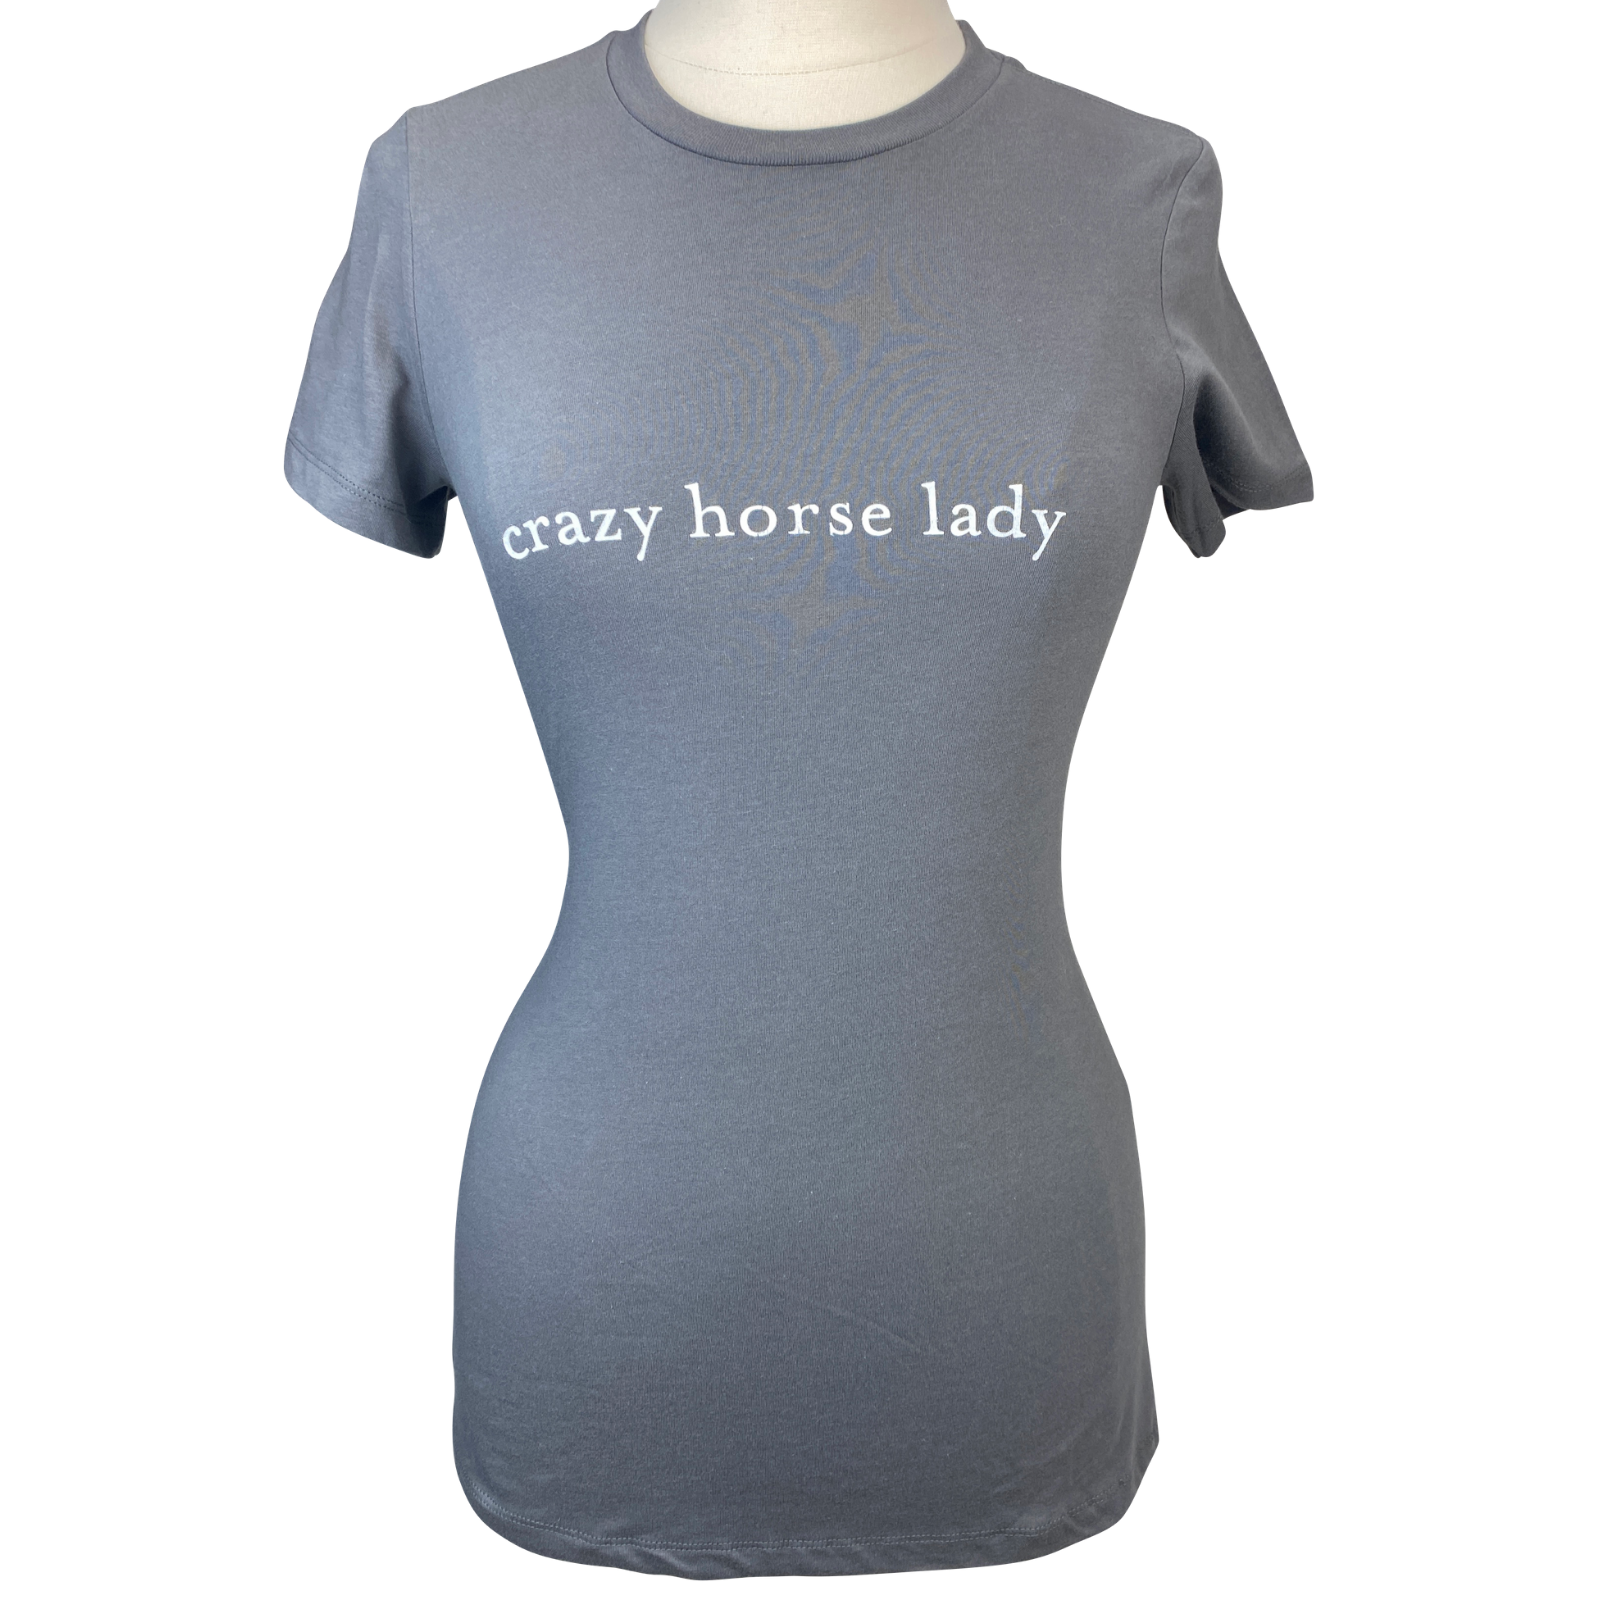 Spiced Equestrian "Crazy Horse Lady" Tee in Grey 